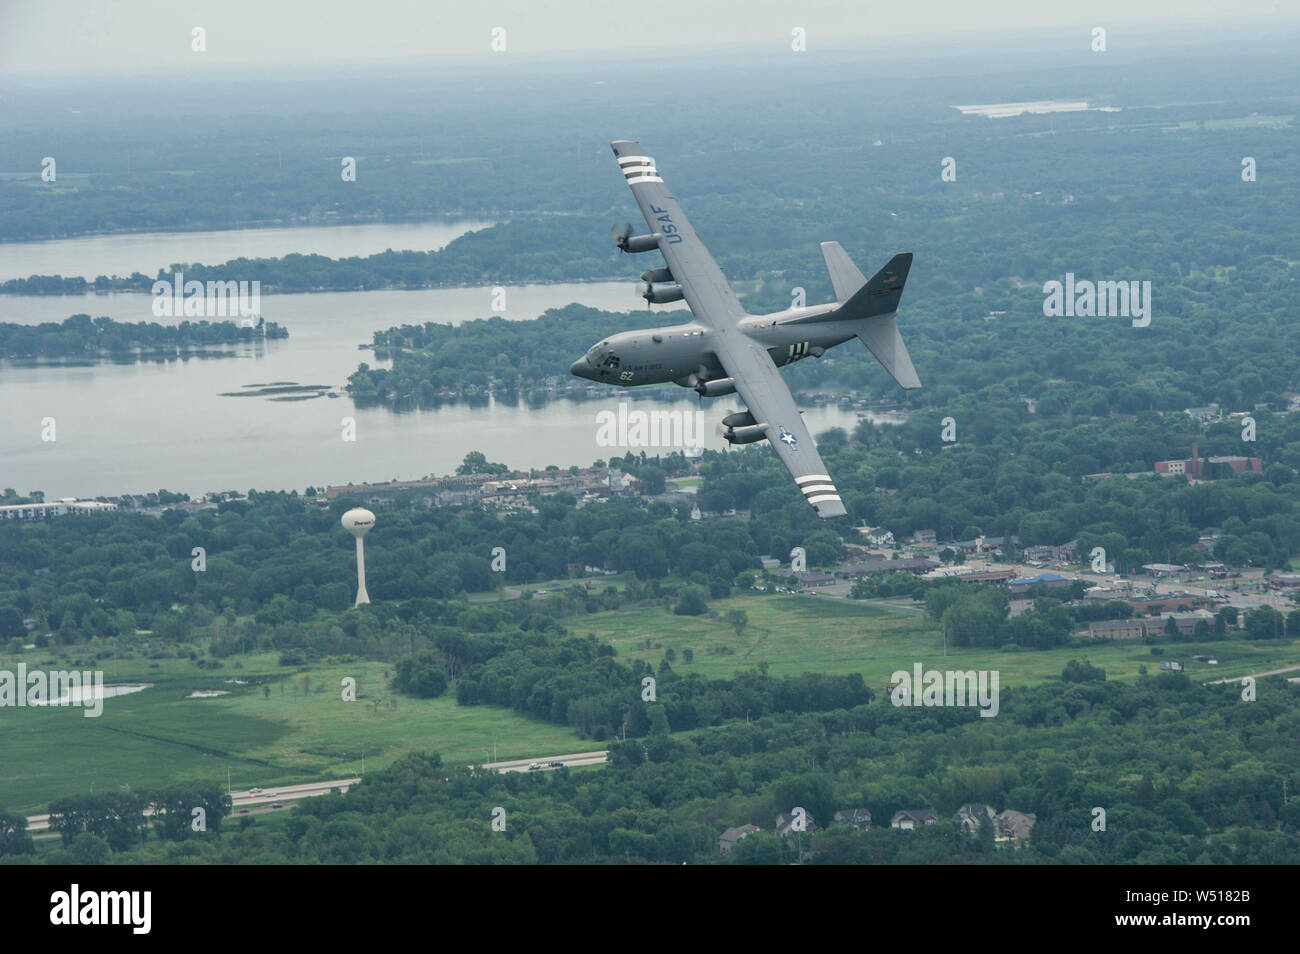 A U.S. Air Force C-130H Hercules aircraft from the 96th Airlift Squadron, Minneapolis-St. Paul Air Reserve Station, Minn., flies over Minnesota, July 16, 2019. Aircraft number 23284 was painted with WWII invasion stripes in honor of the 75th anniversary of D-Day. Originally activated as the 96th Troop Carrier Squadron, the 96th, dropped paratroops of the 101st Airborne Division in Normandy during the D-Day invasion and flew numerous missions to bring in reinforcements and needed supplies during the war. (U.S. Air Force Photo by Tech. Sgt. Amber E. N. Kurka) Stock Photo